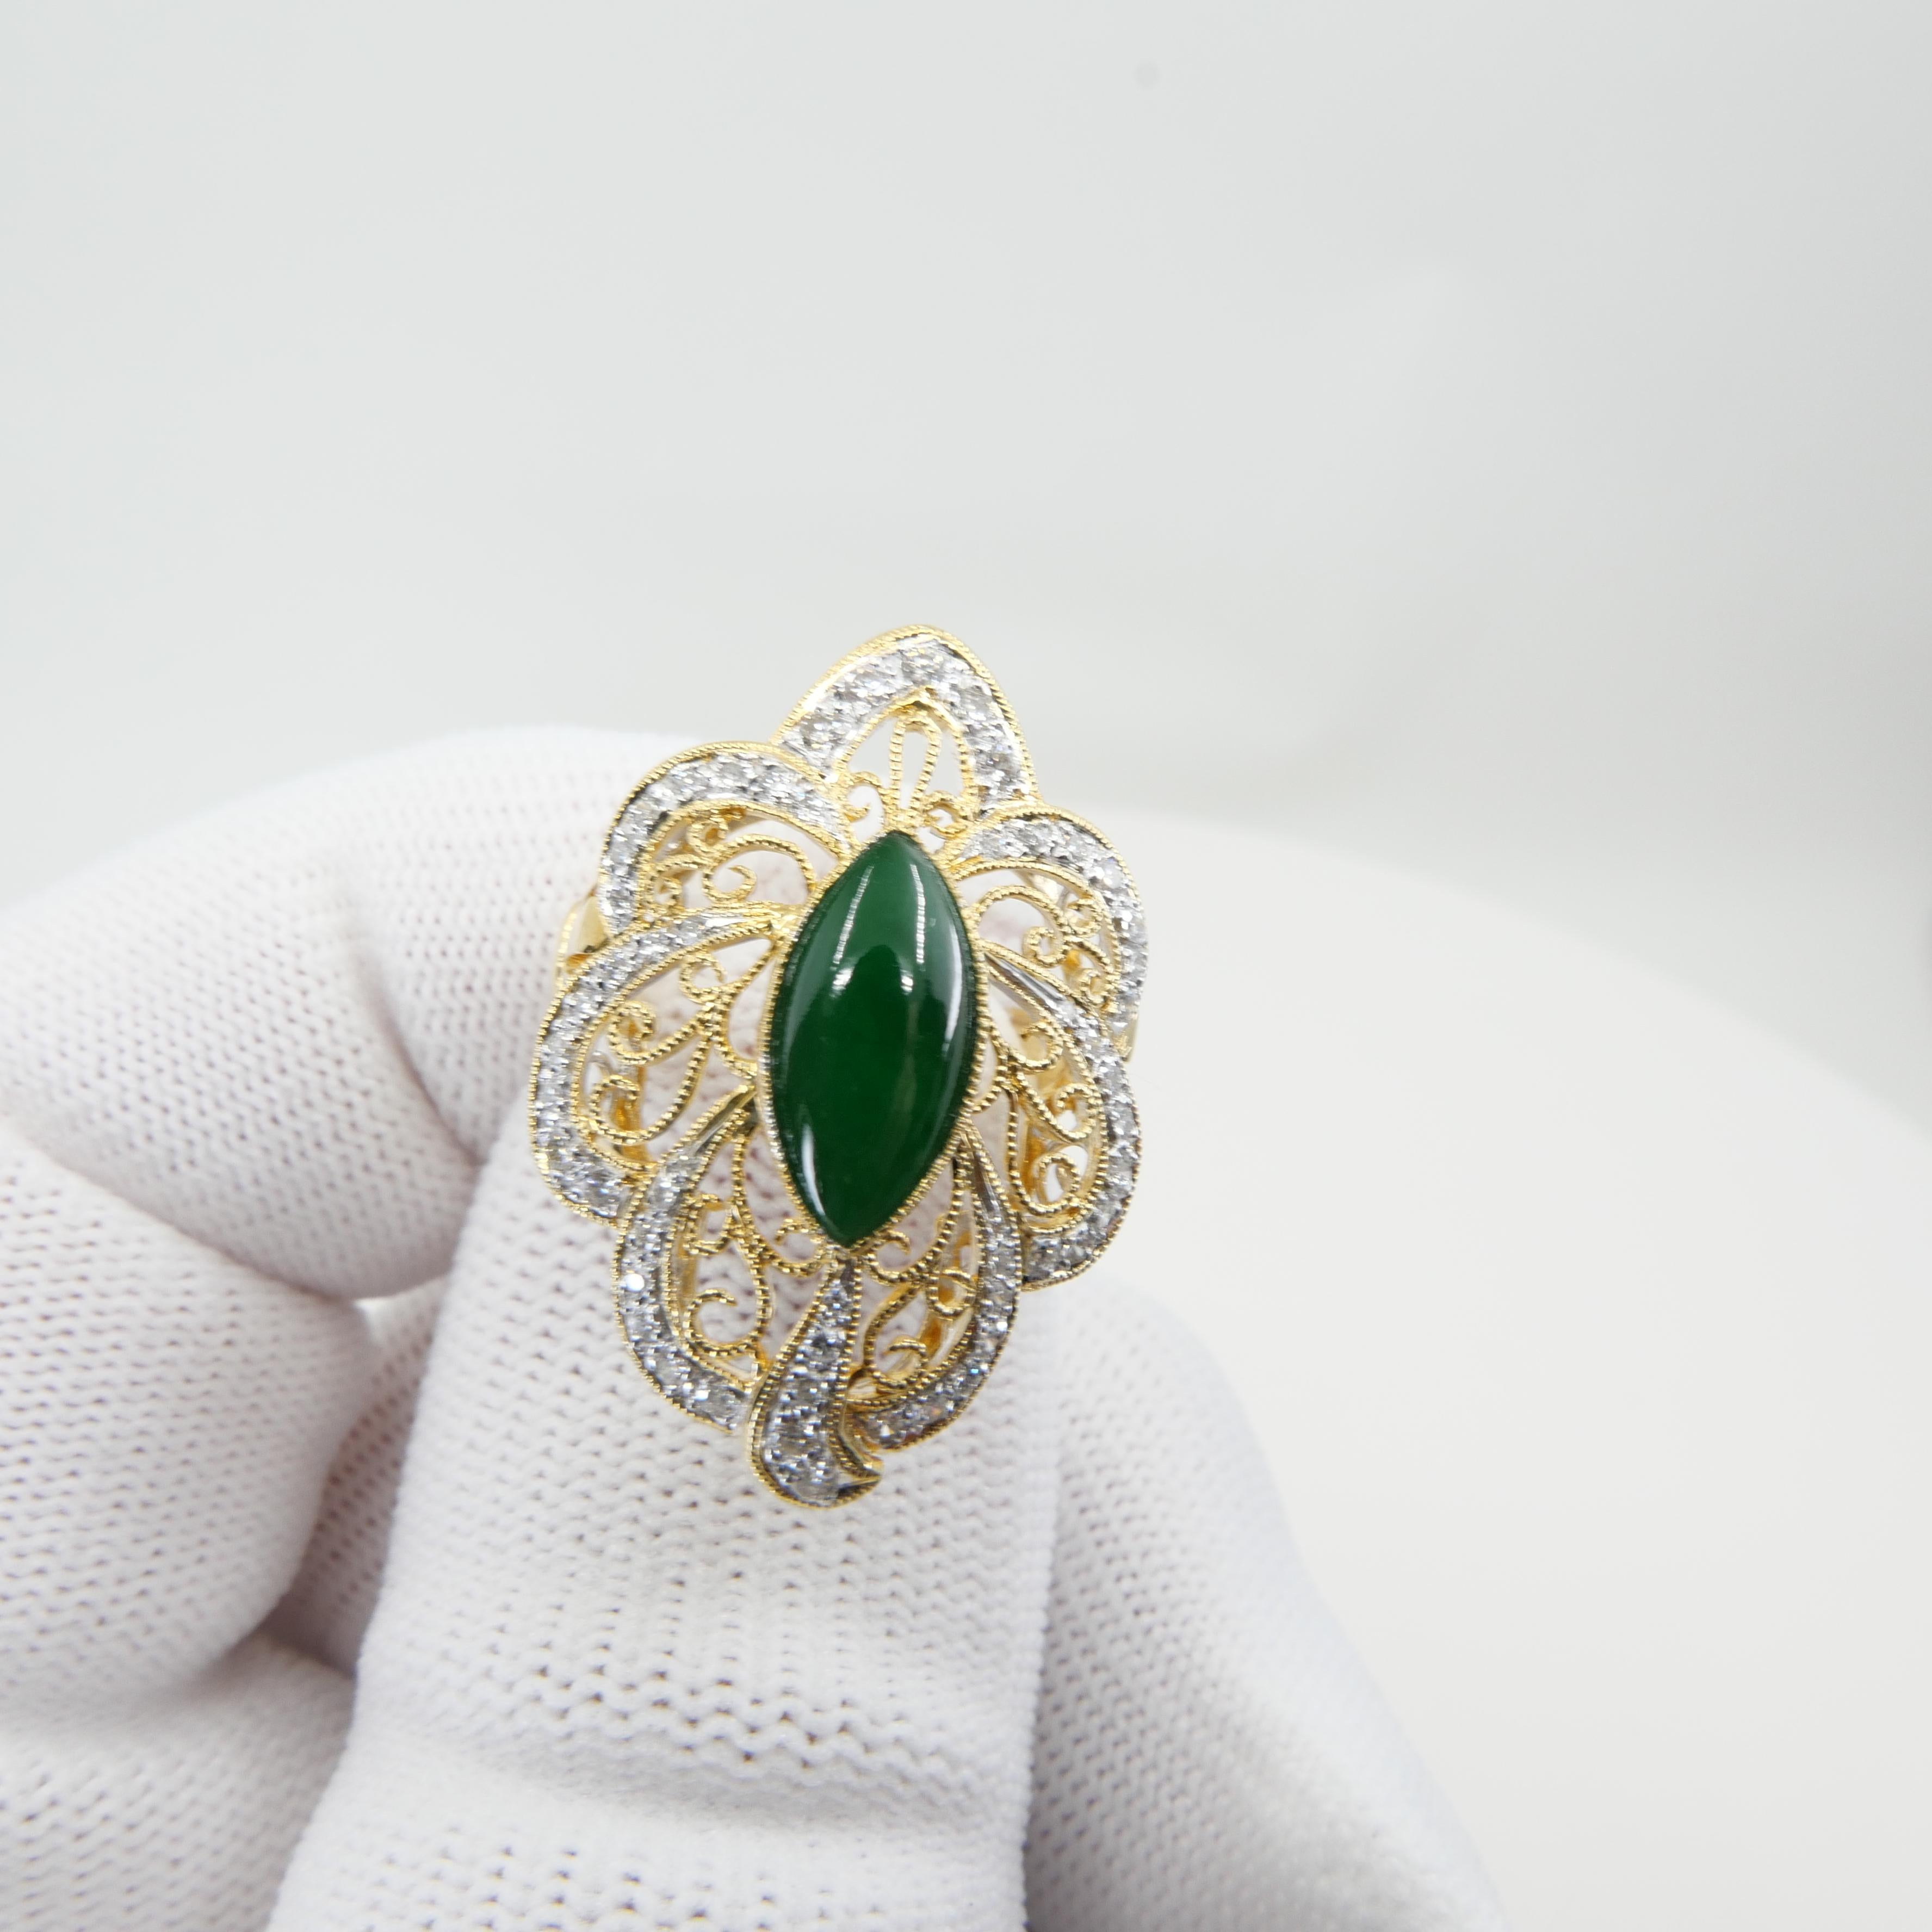 Certified Jadeite Jade & Diamond Cocktail Ring, Intense Apple Green Color For Sale 4